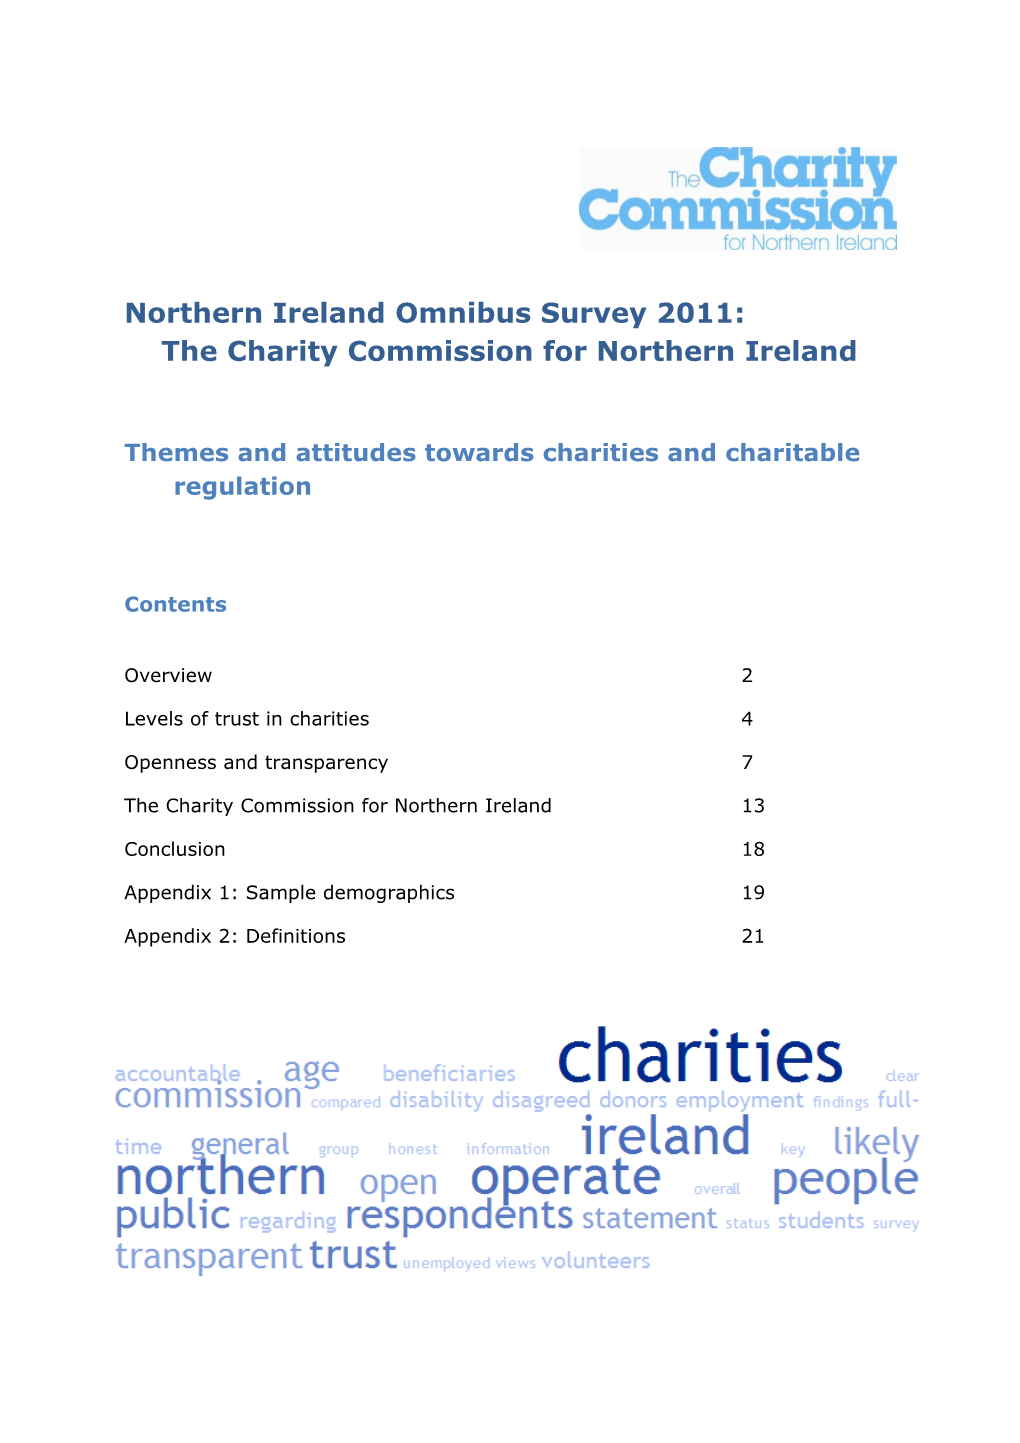 Northern Ireland Omnibus Survey 2011: the Charity Commission for Northern Ireland